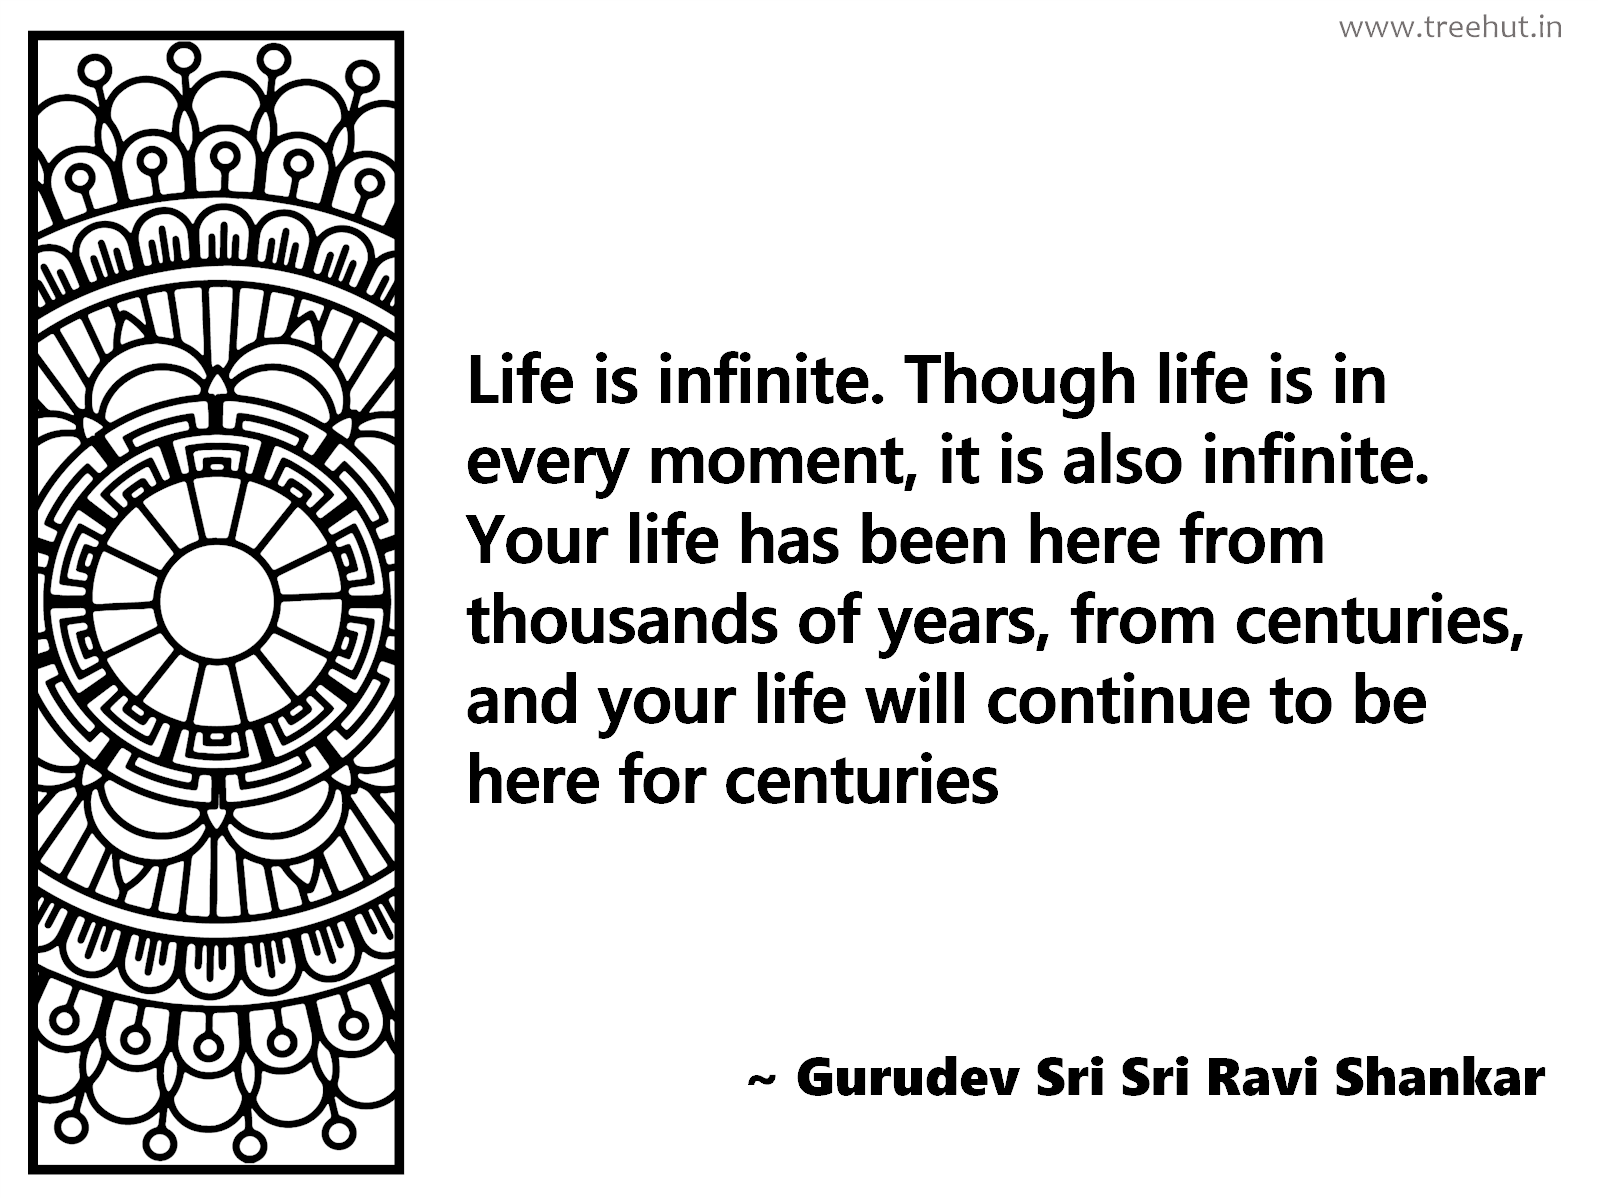 Life is infinite. Though life is in every moment, it is also infinite. Your life has been here from thousands of years, from centuries, and your life will continue to be here for centuries Inspirational Quote by Gurudev Sri Sri Ravi Shankar, coloring pages